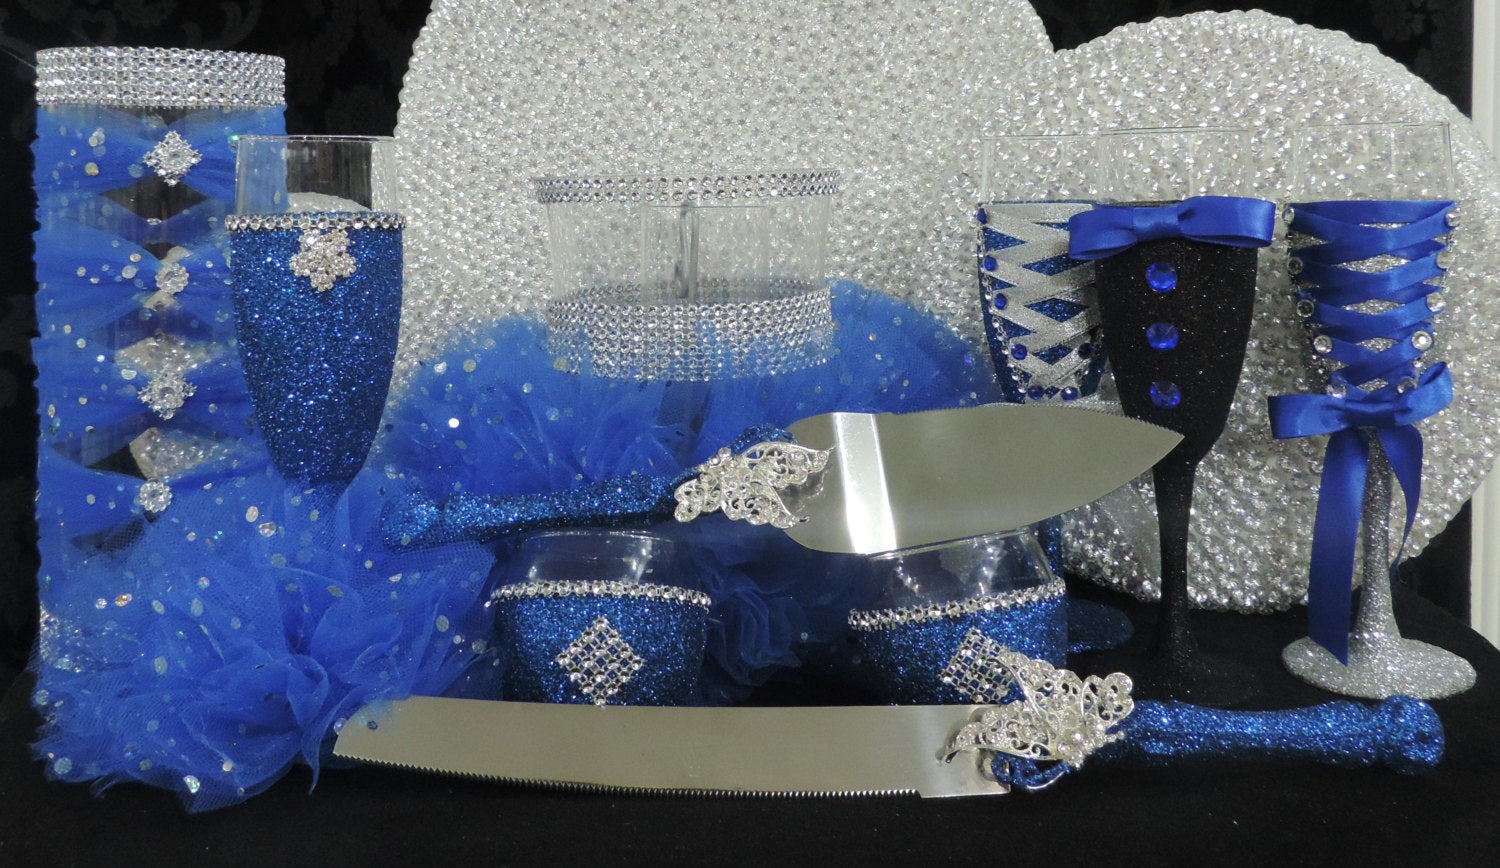 royal blue and silver wedding centerpieces